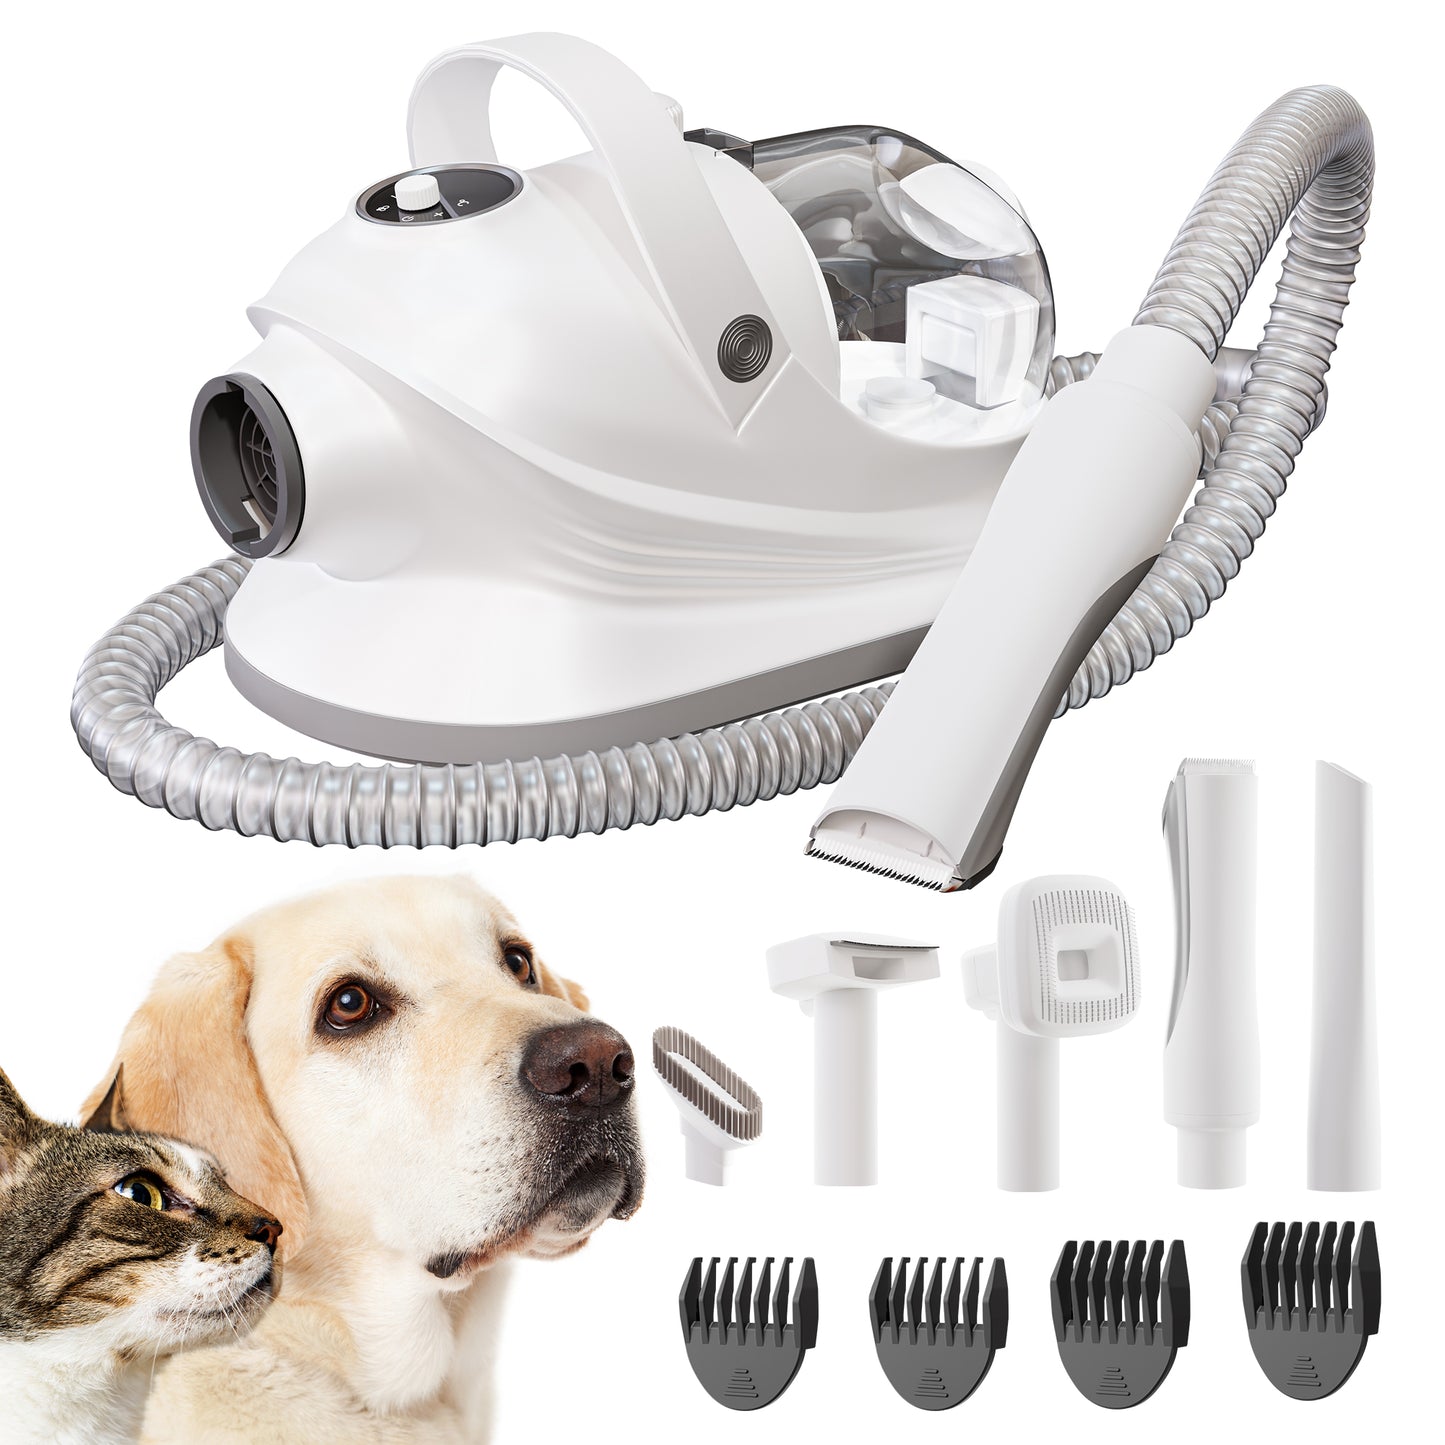 FIDOFAVE Grooming High Velocity Dog & Cat Grooming Blow Suction All-in-One with 7 Proven Grooming Tools